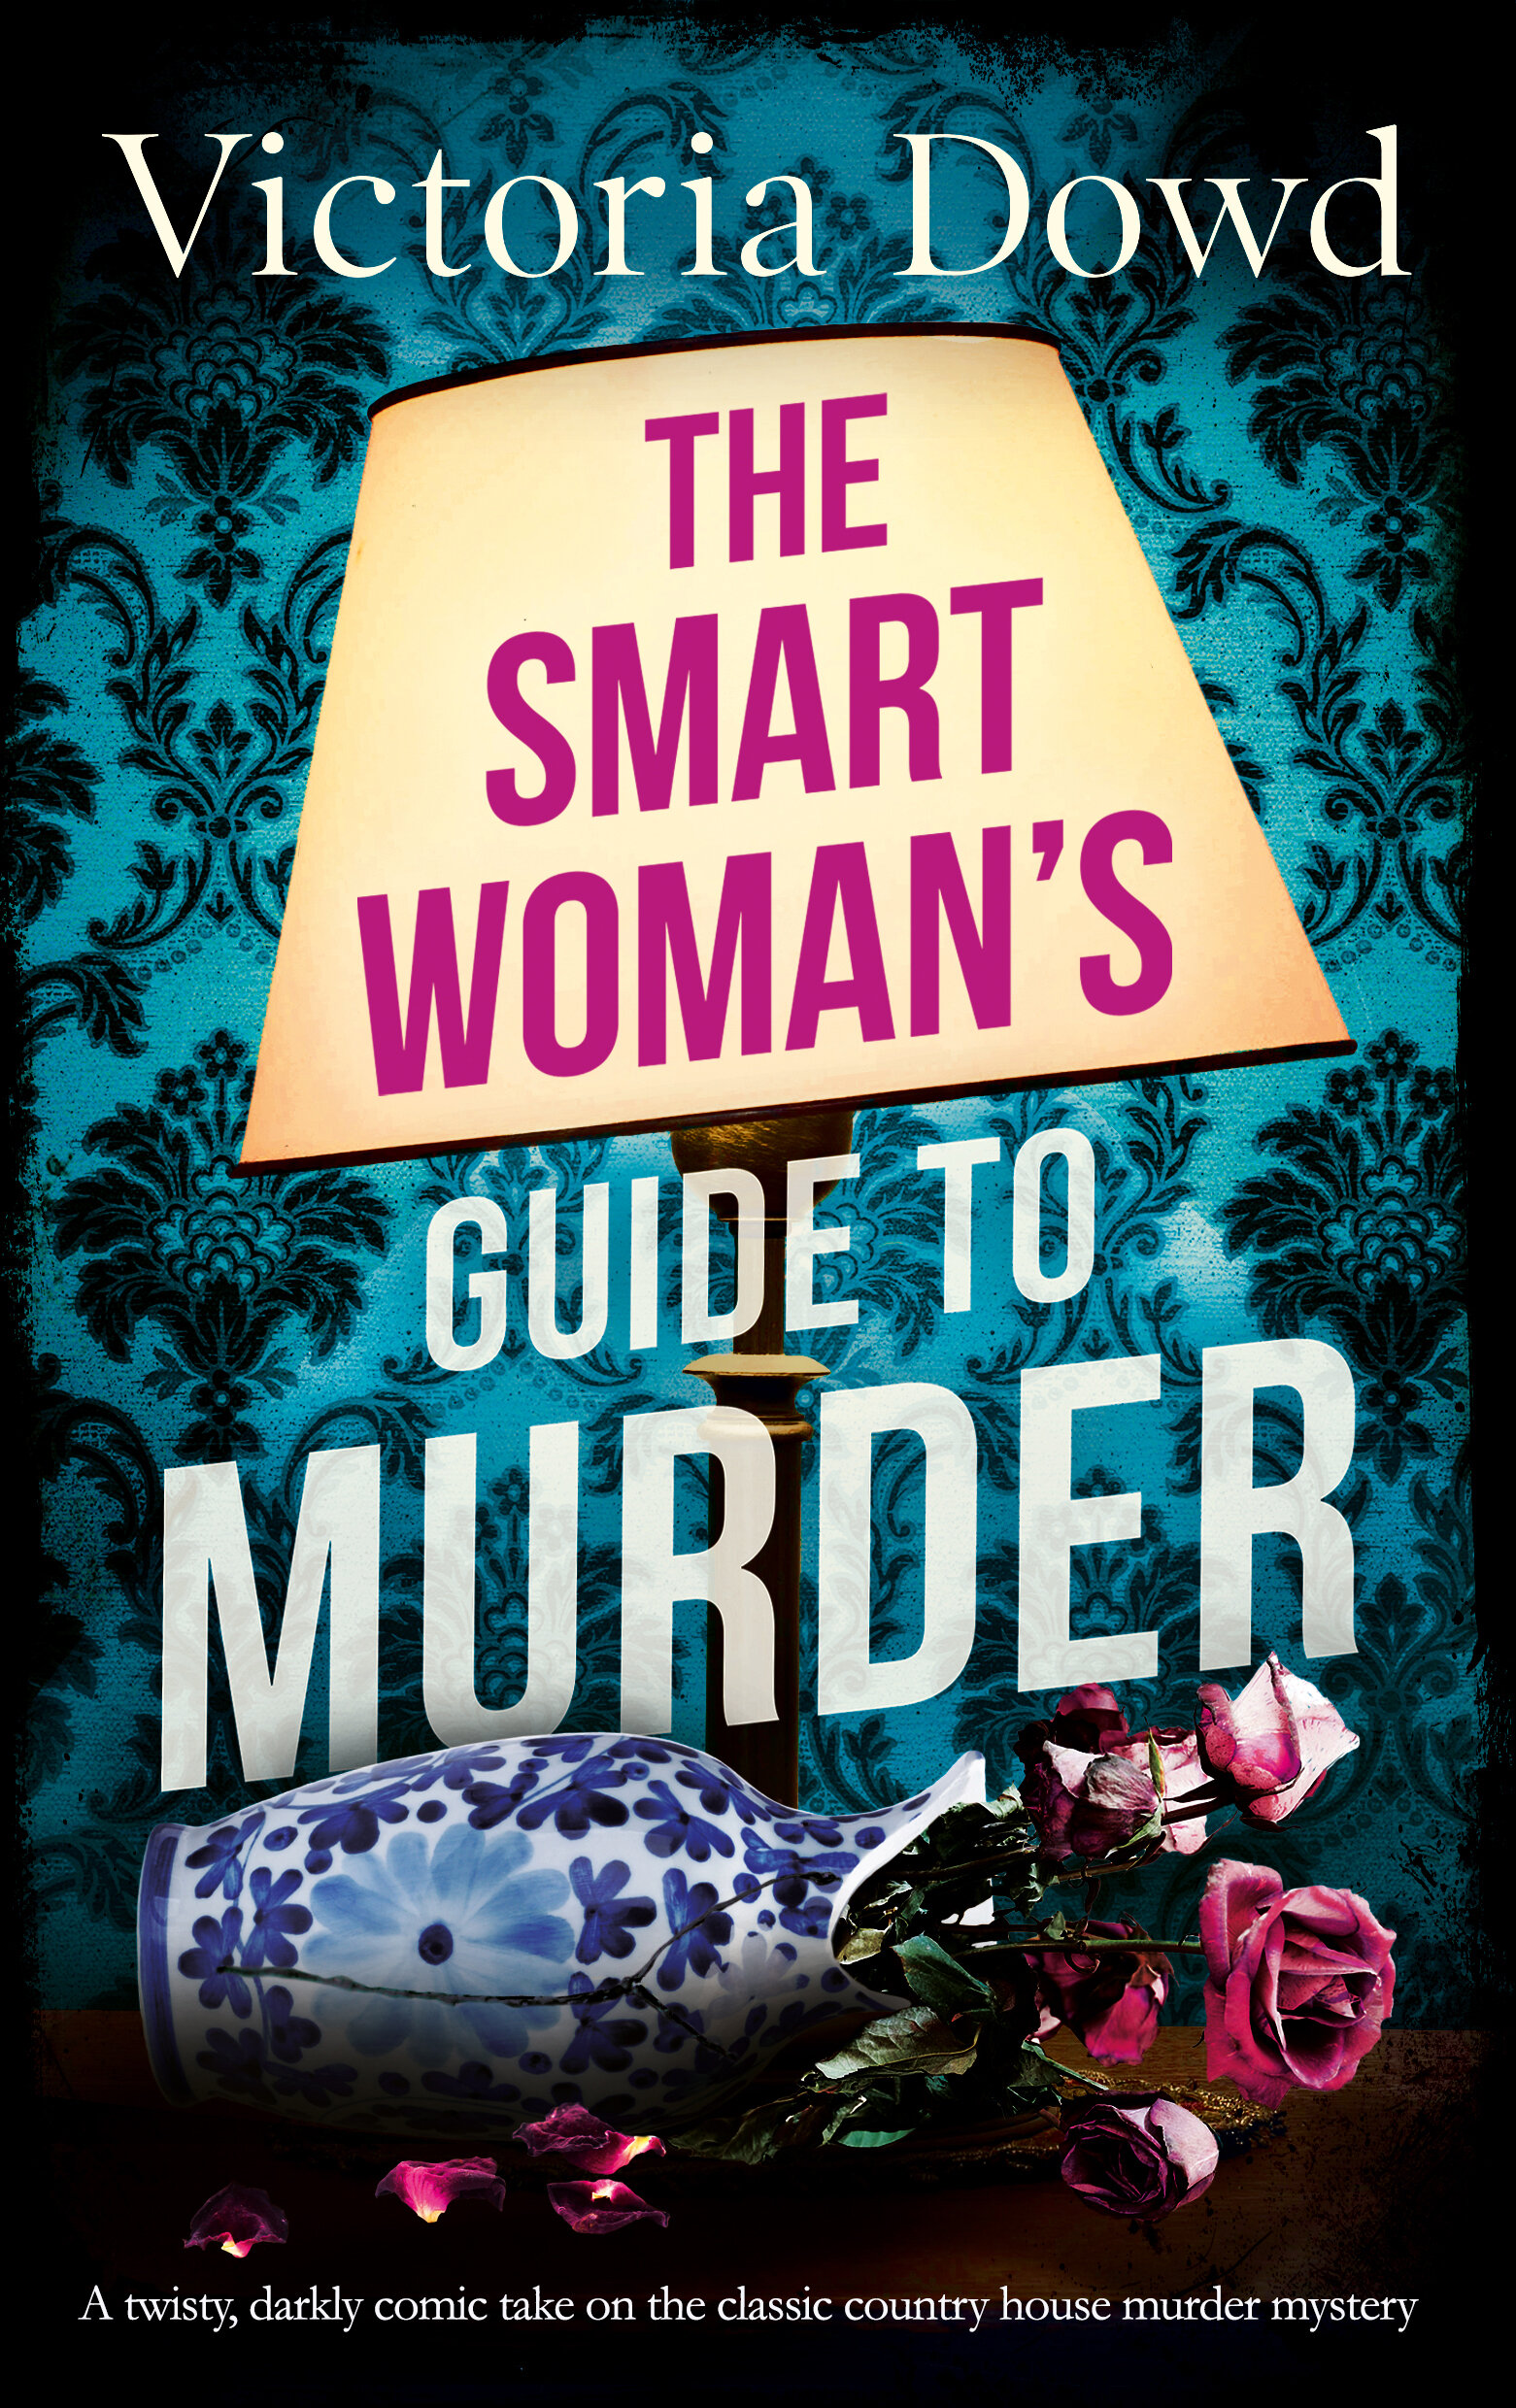 THE SMART WOMAN'S publish cover.jpg